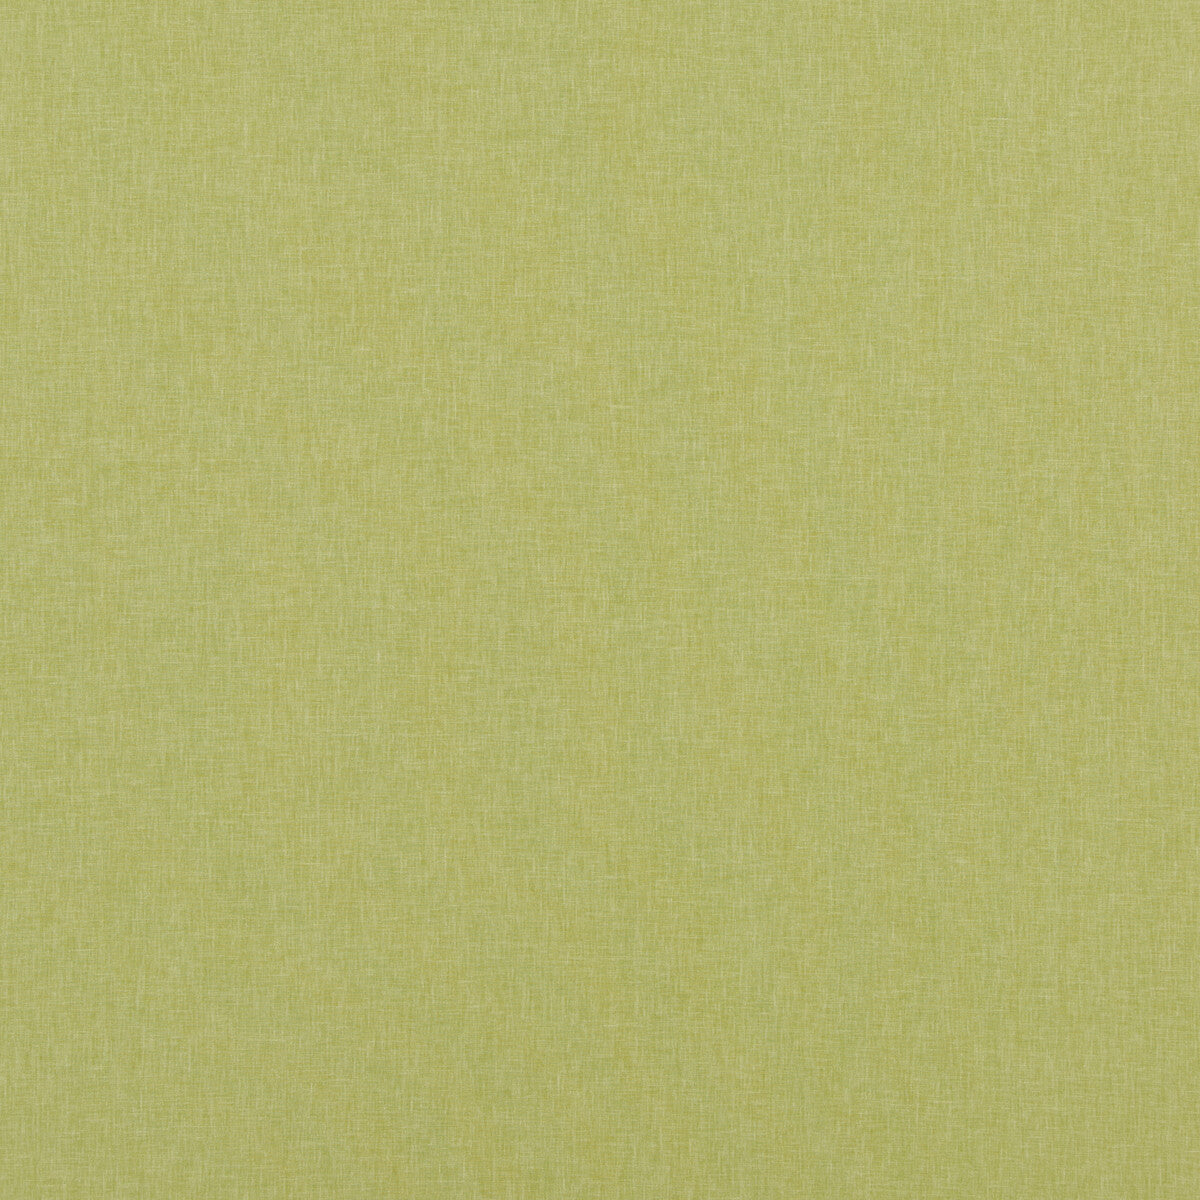 Carnival Plain fabric in lime color - pattern PF50420.755.0 - by Baker Lifestyle in the Carnival collection